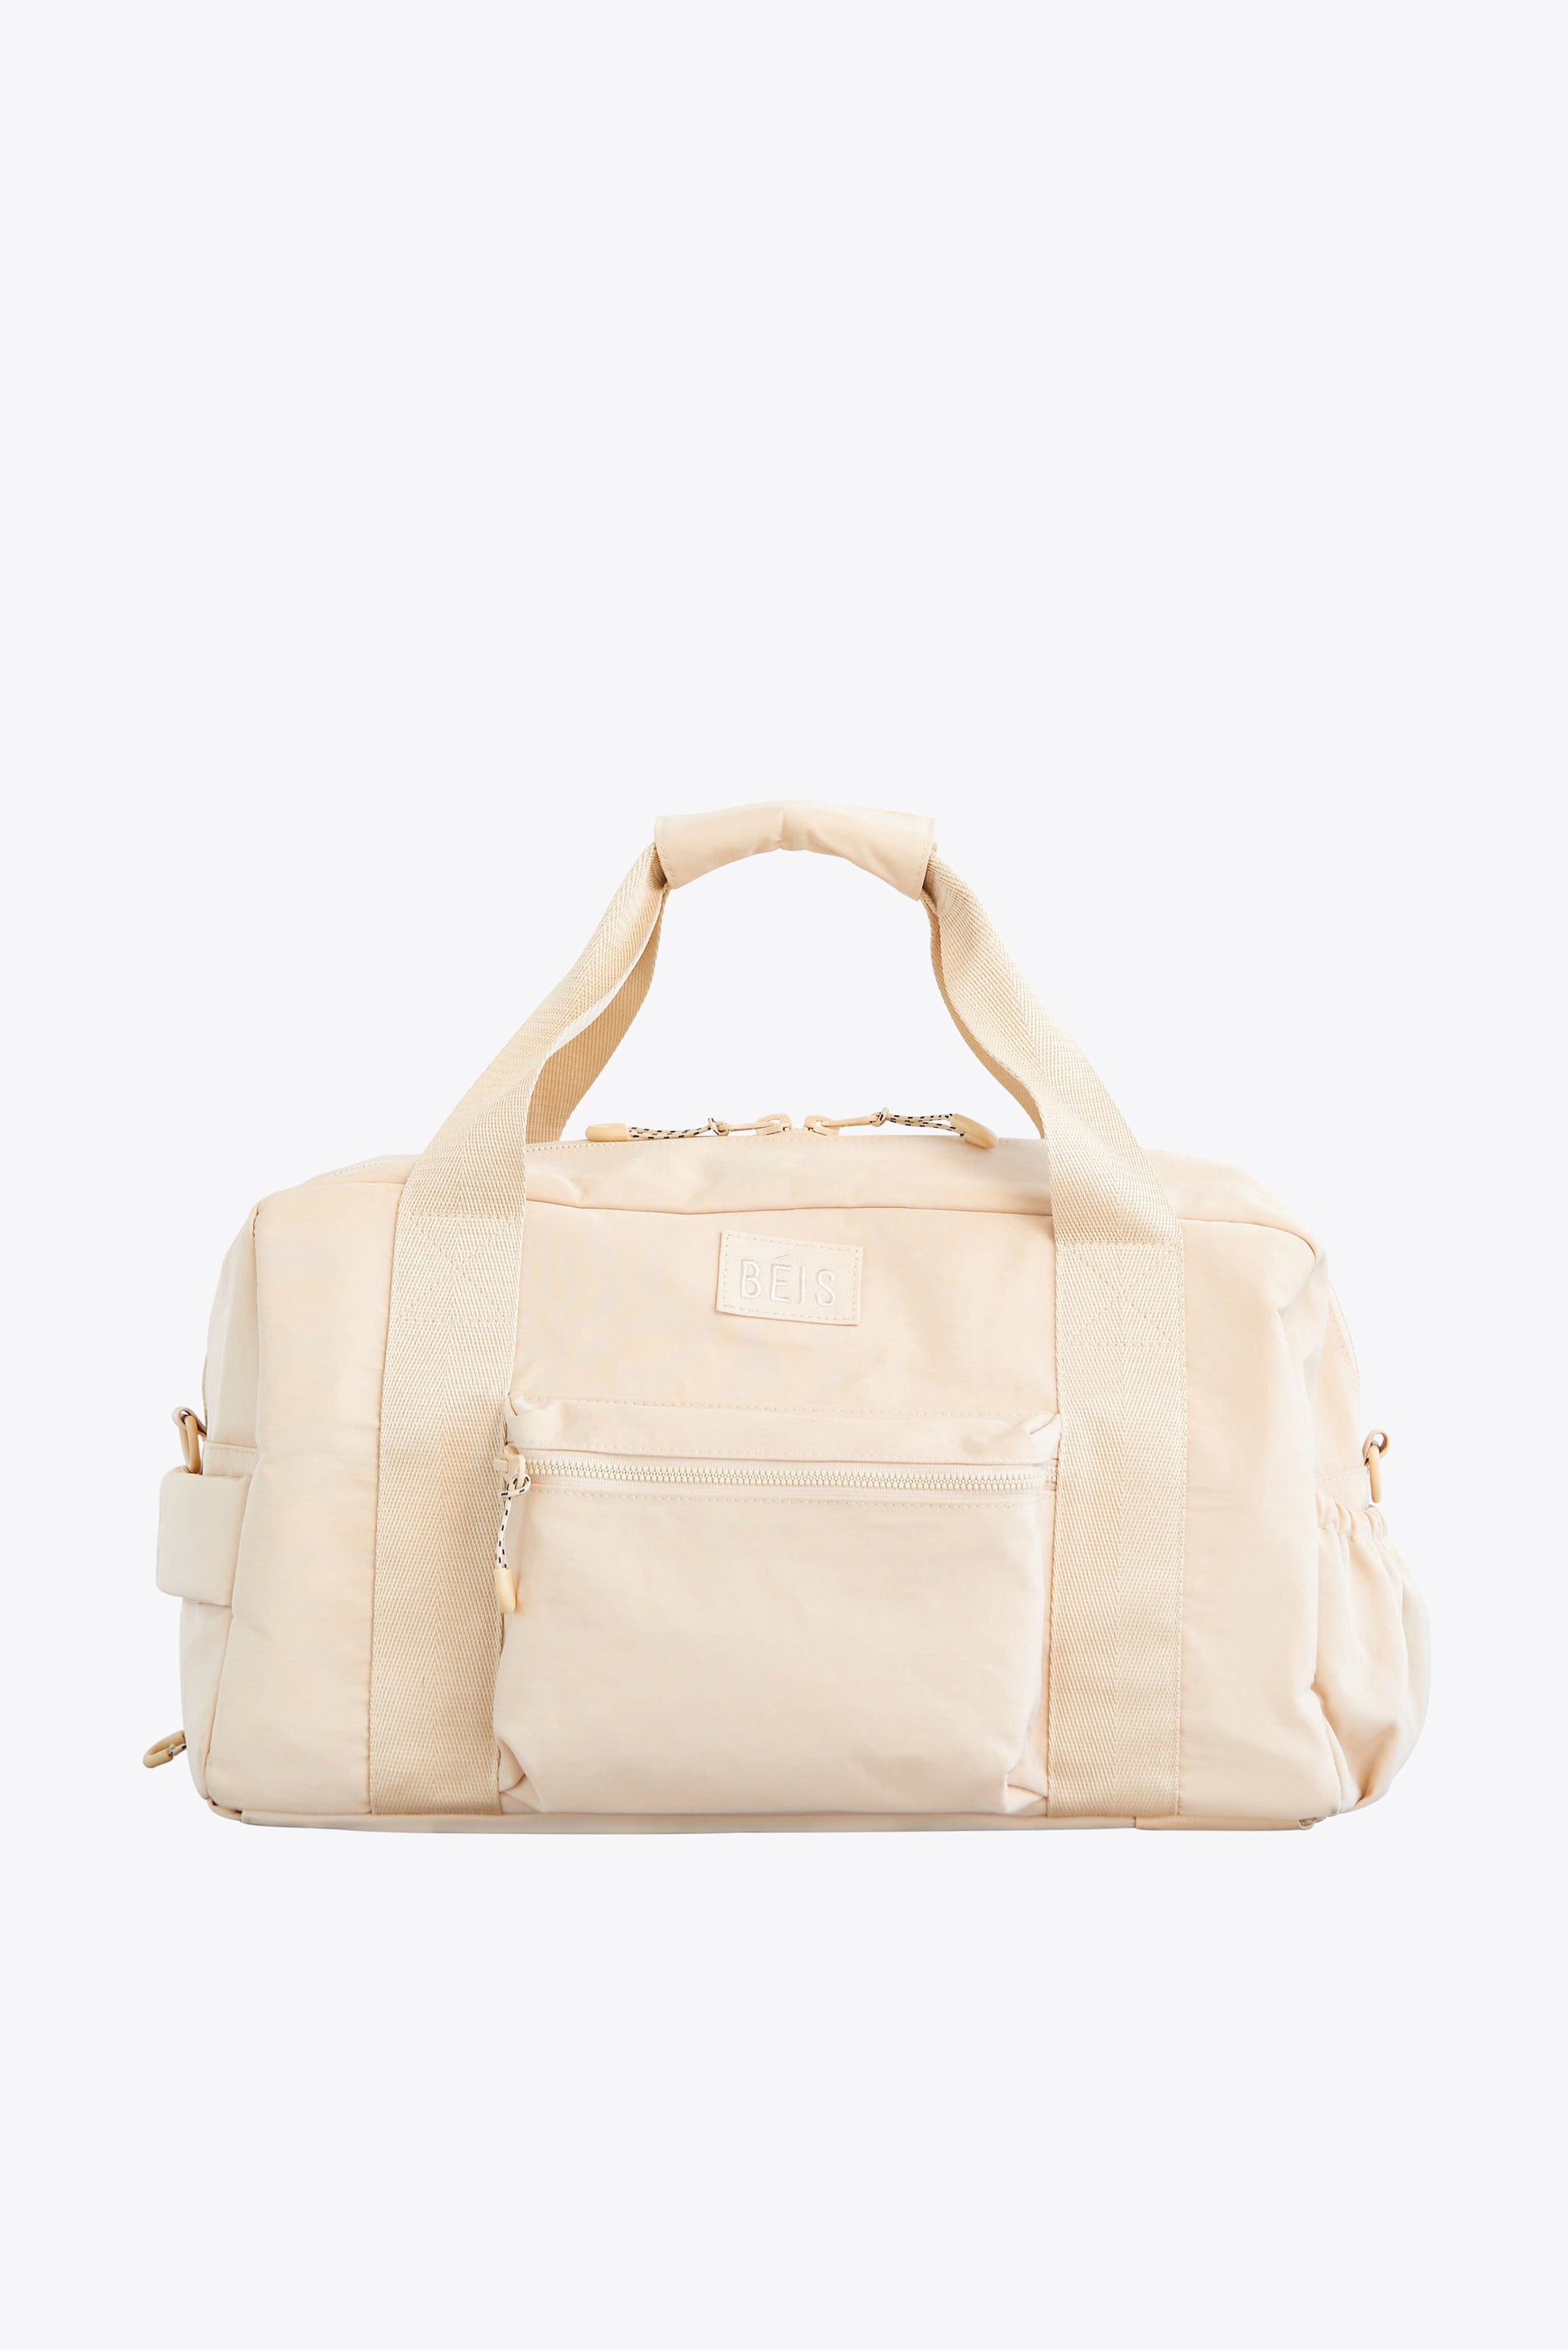 BÉIS 'The Sport Duffle' in Biege - Beige Duffle Bag For The Gym